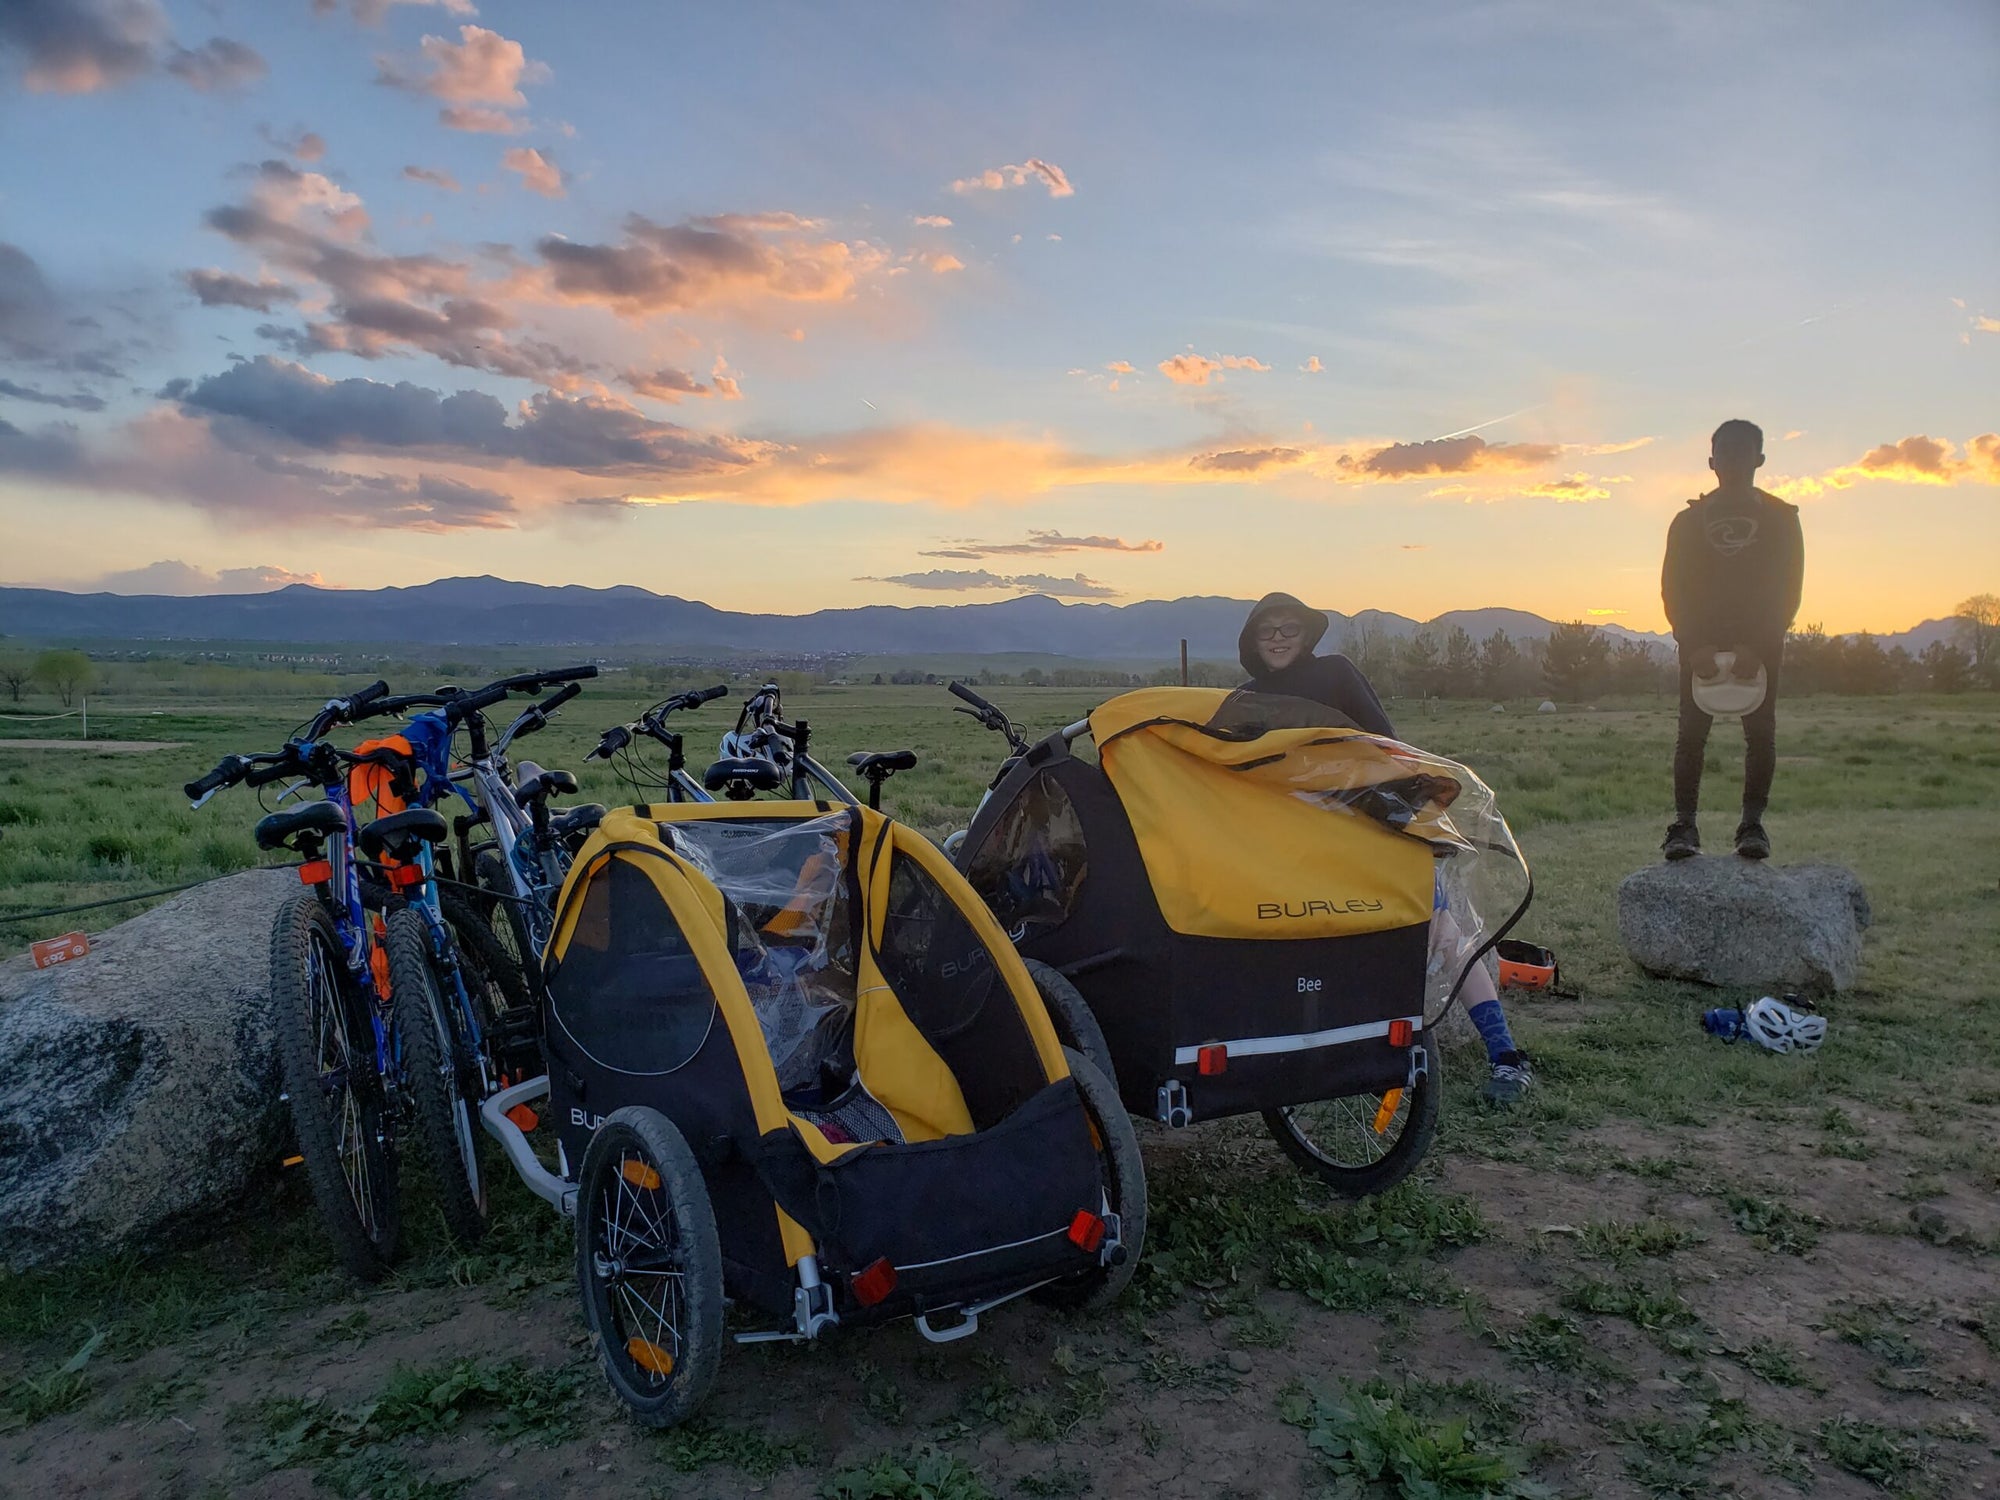 bike trailers and bikes parked in field with sunset in background